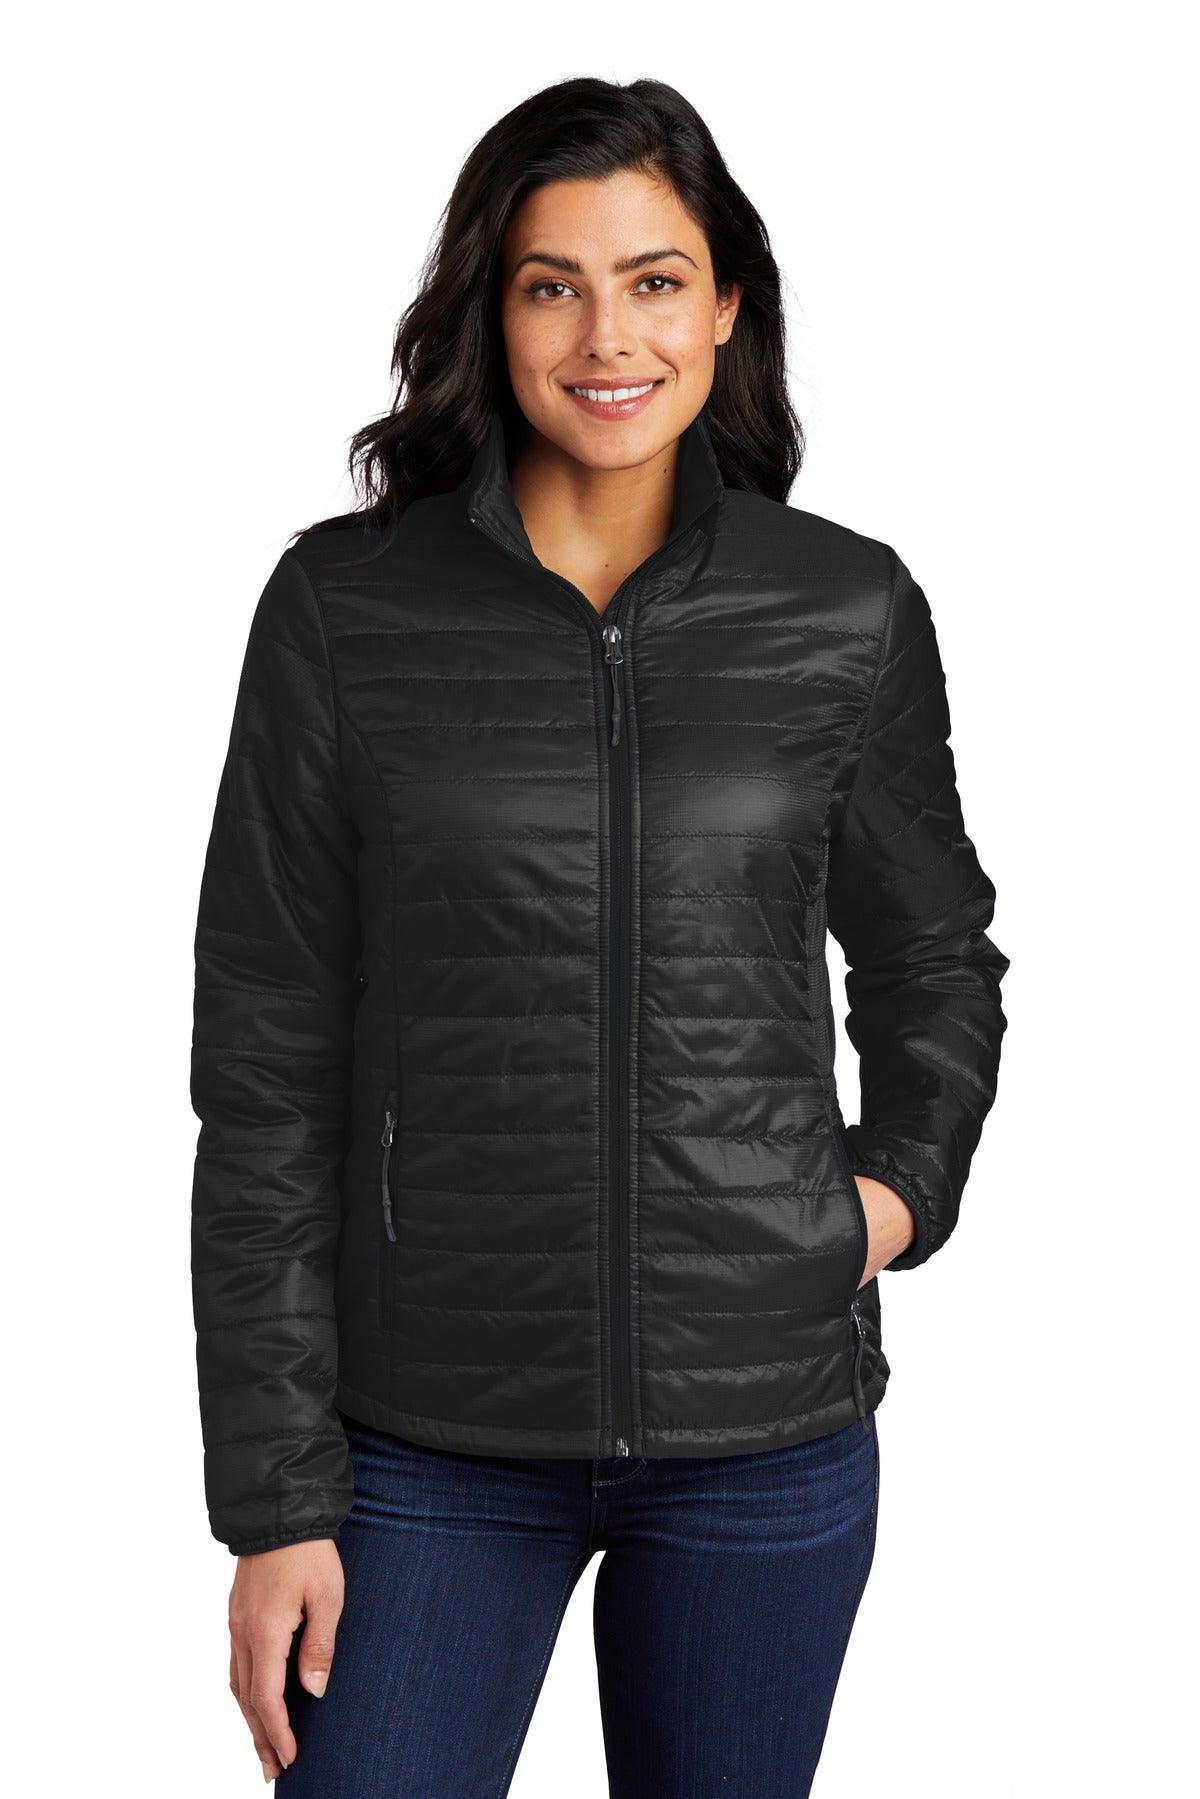 Port Authority Ladies Packable Puffy Jacket L850 - Dresses Max